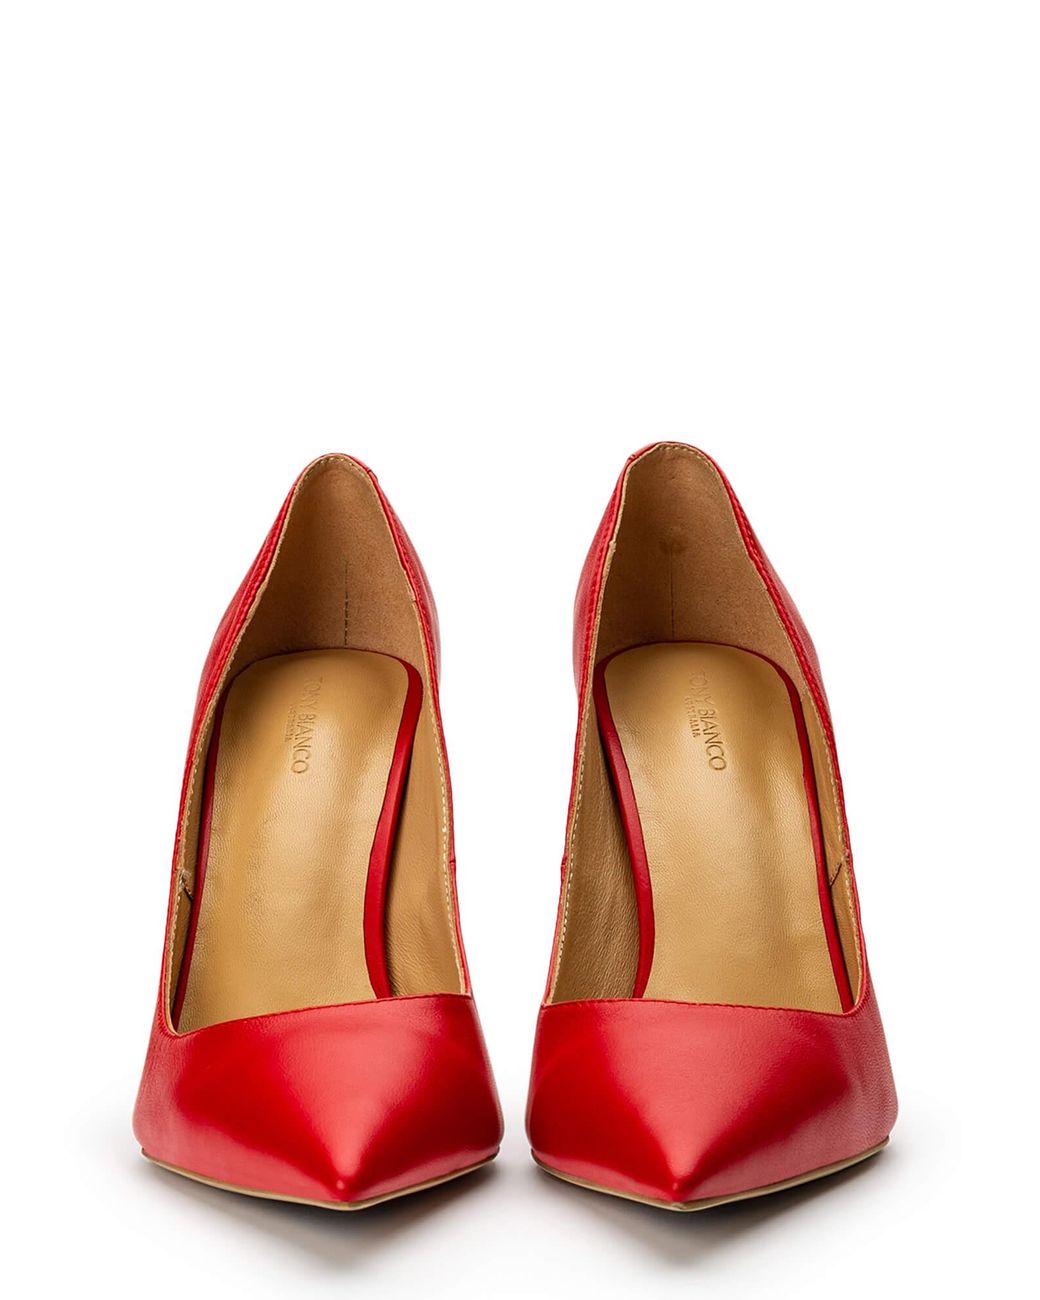 Tony Bianco Leather Alyx 10.5cm Heels in Red - Lyst